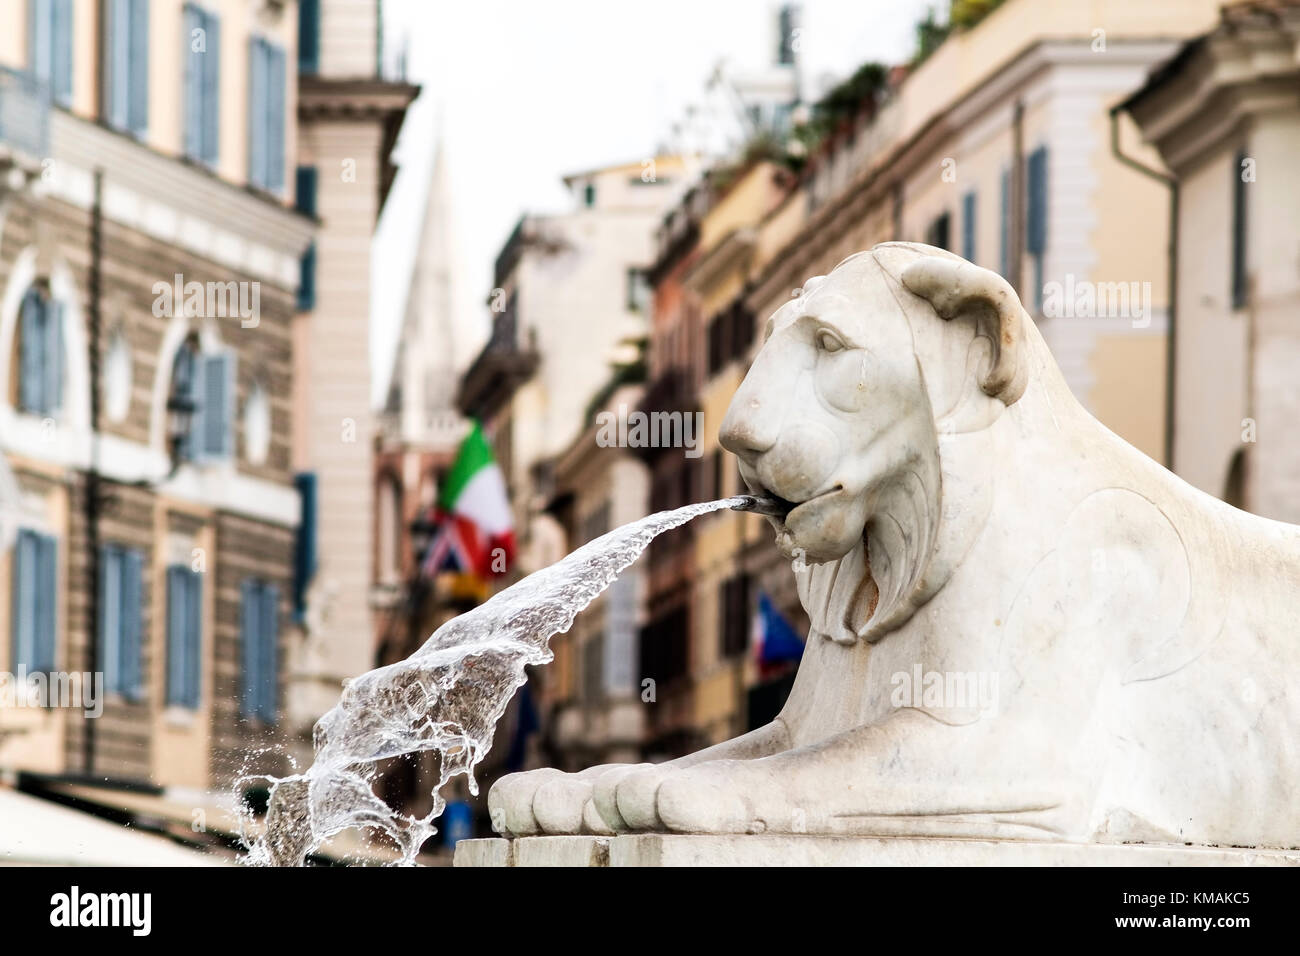 lion statues of Obelisk fountain in People's Squar, Rome Stock Photo